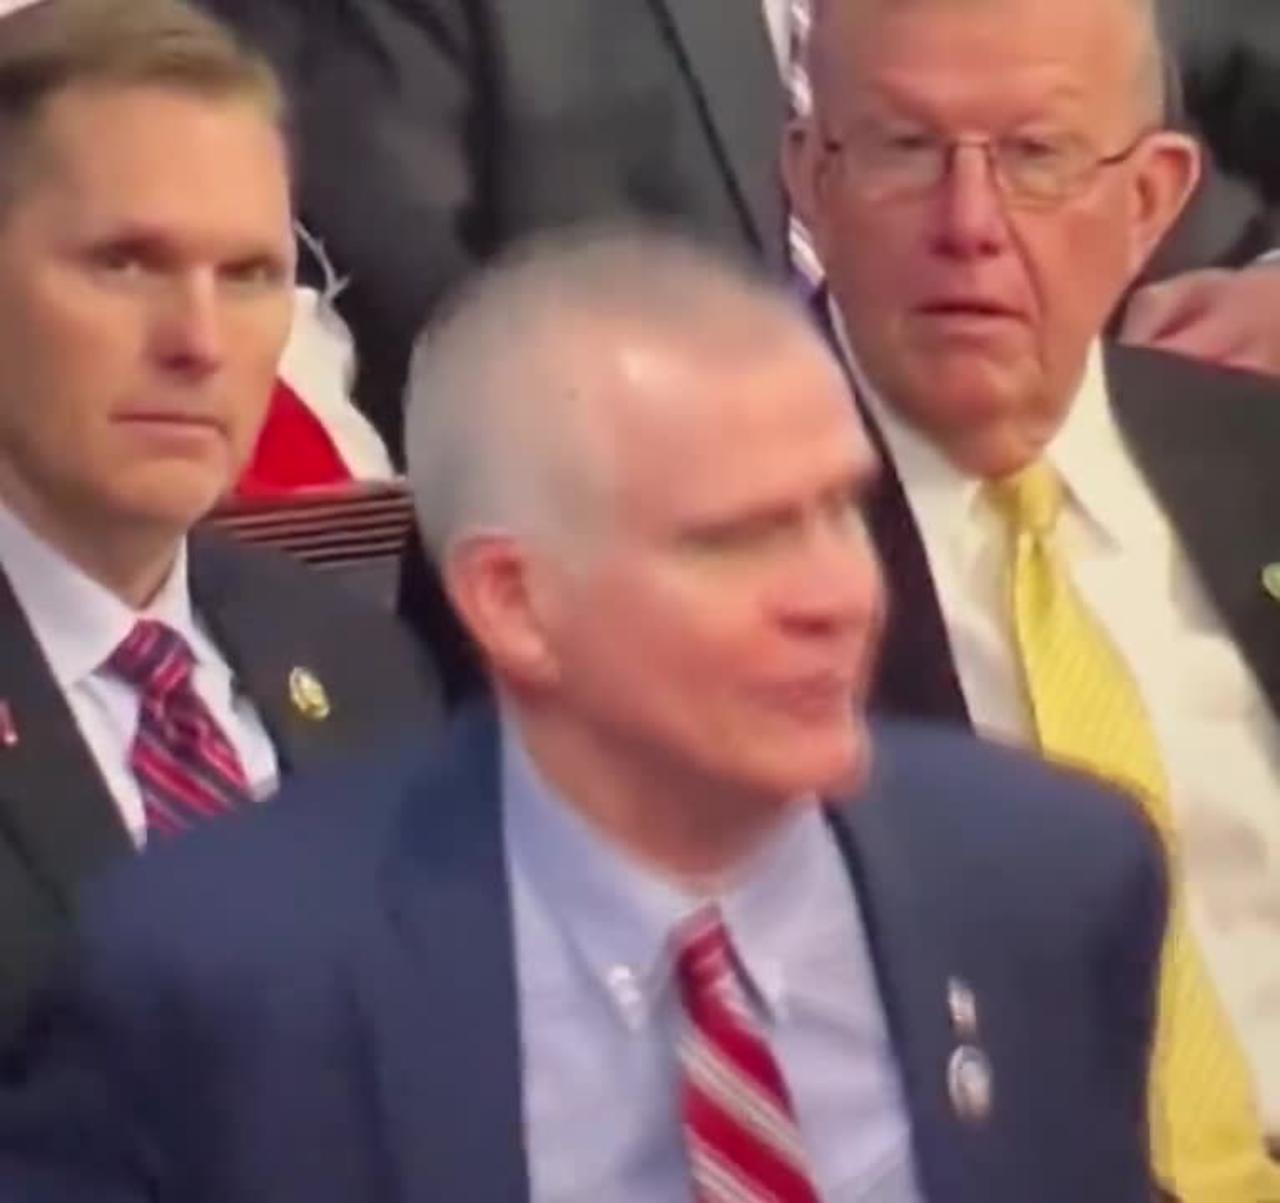 GOP Rep Rosendale votes for “Kevin” then pauses, smirks and says “Hern.” Walks away laughing